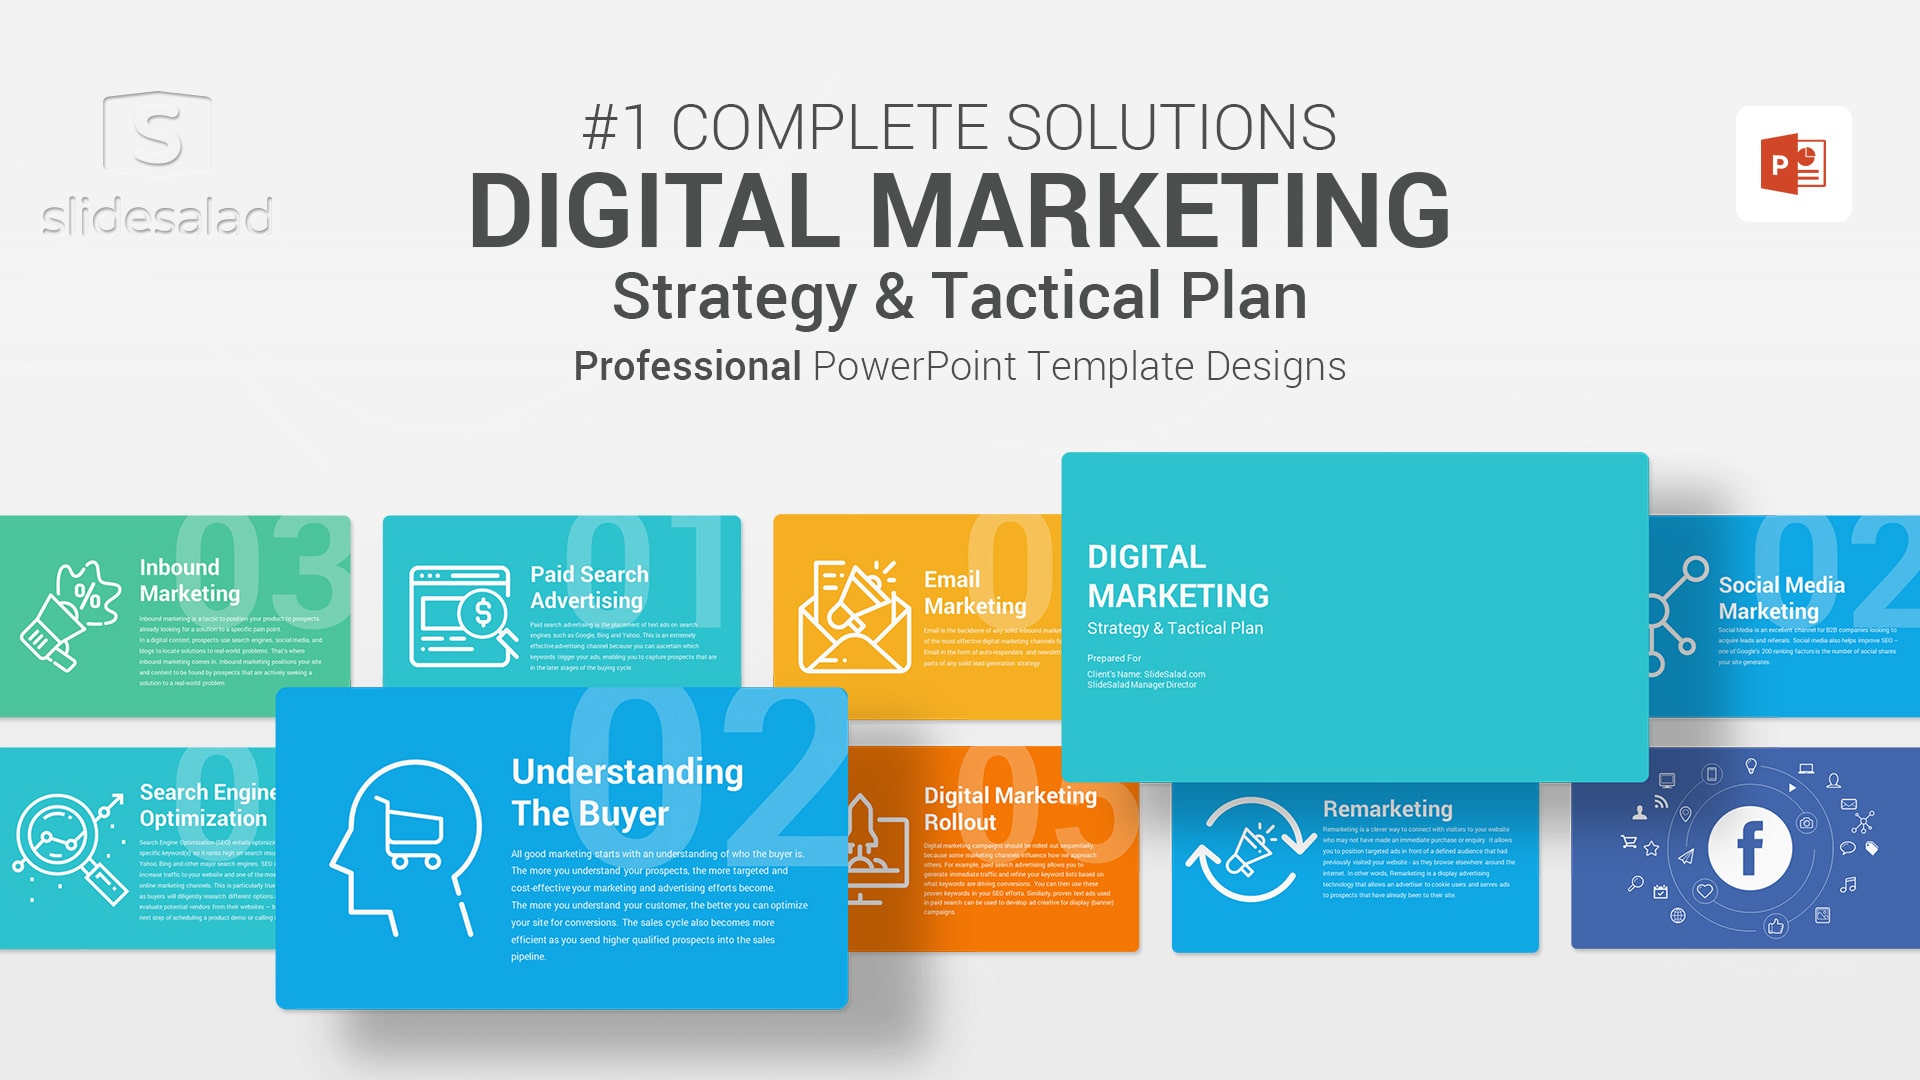 Best Digital Marketing PowerPoint (PPT) Template - Optimal Choice for Digital Marketing Strategies and Plans